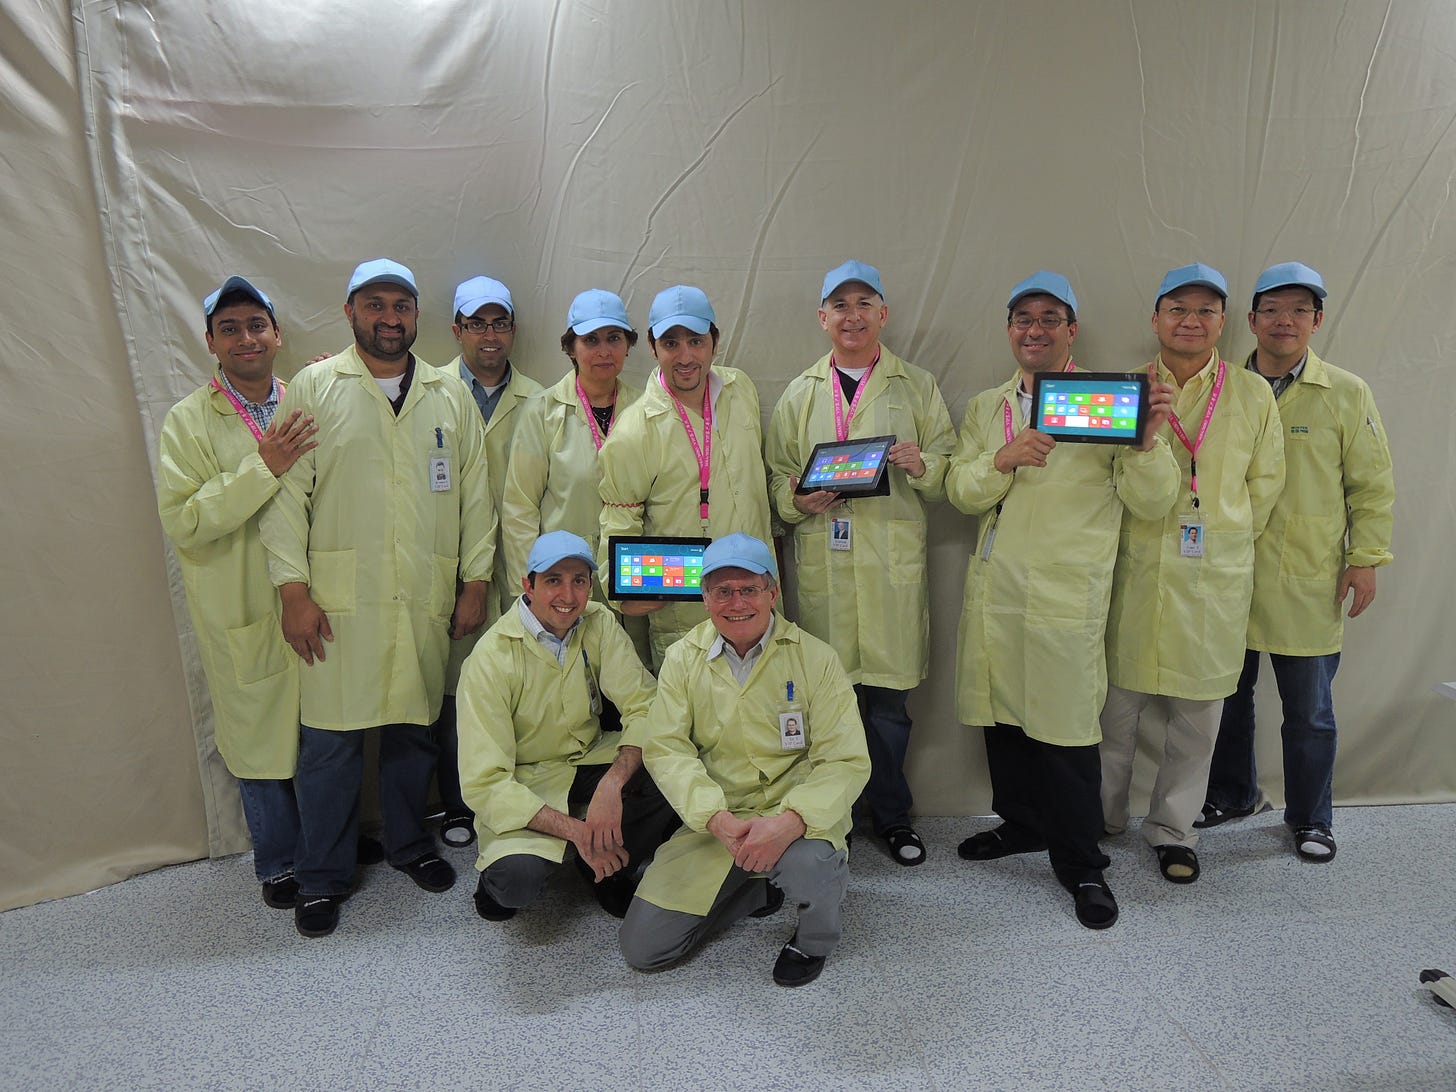 11 members of the team in protective gear posing for a photo at the factory.